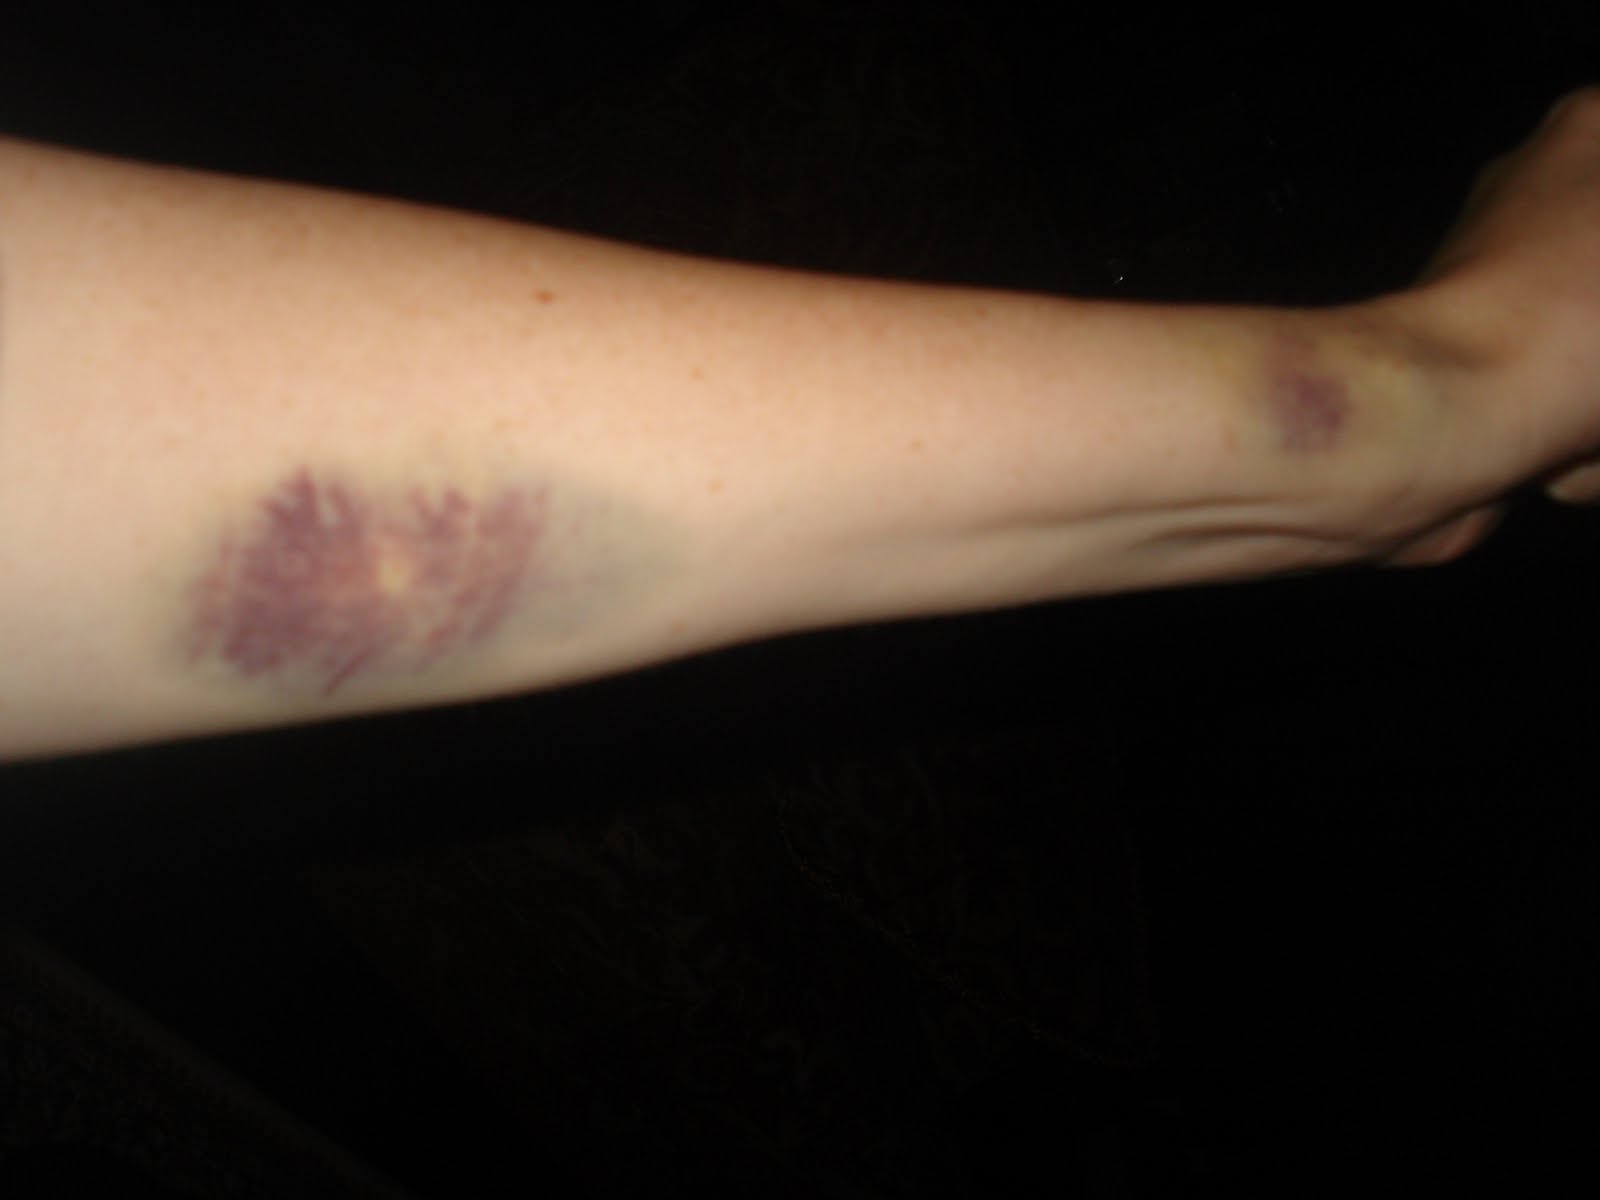 family-of-5-note-to-nurse-this-arm-bruise-is-not-my-fault